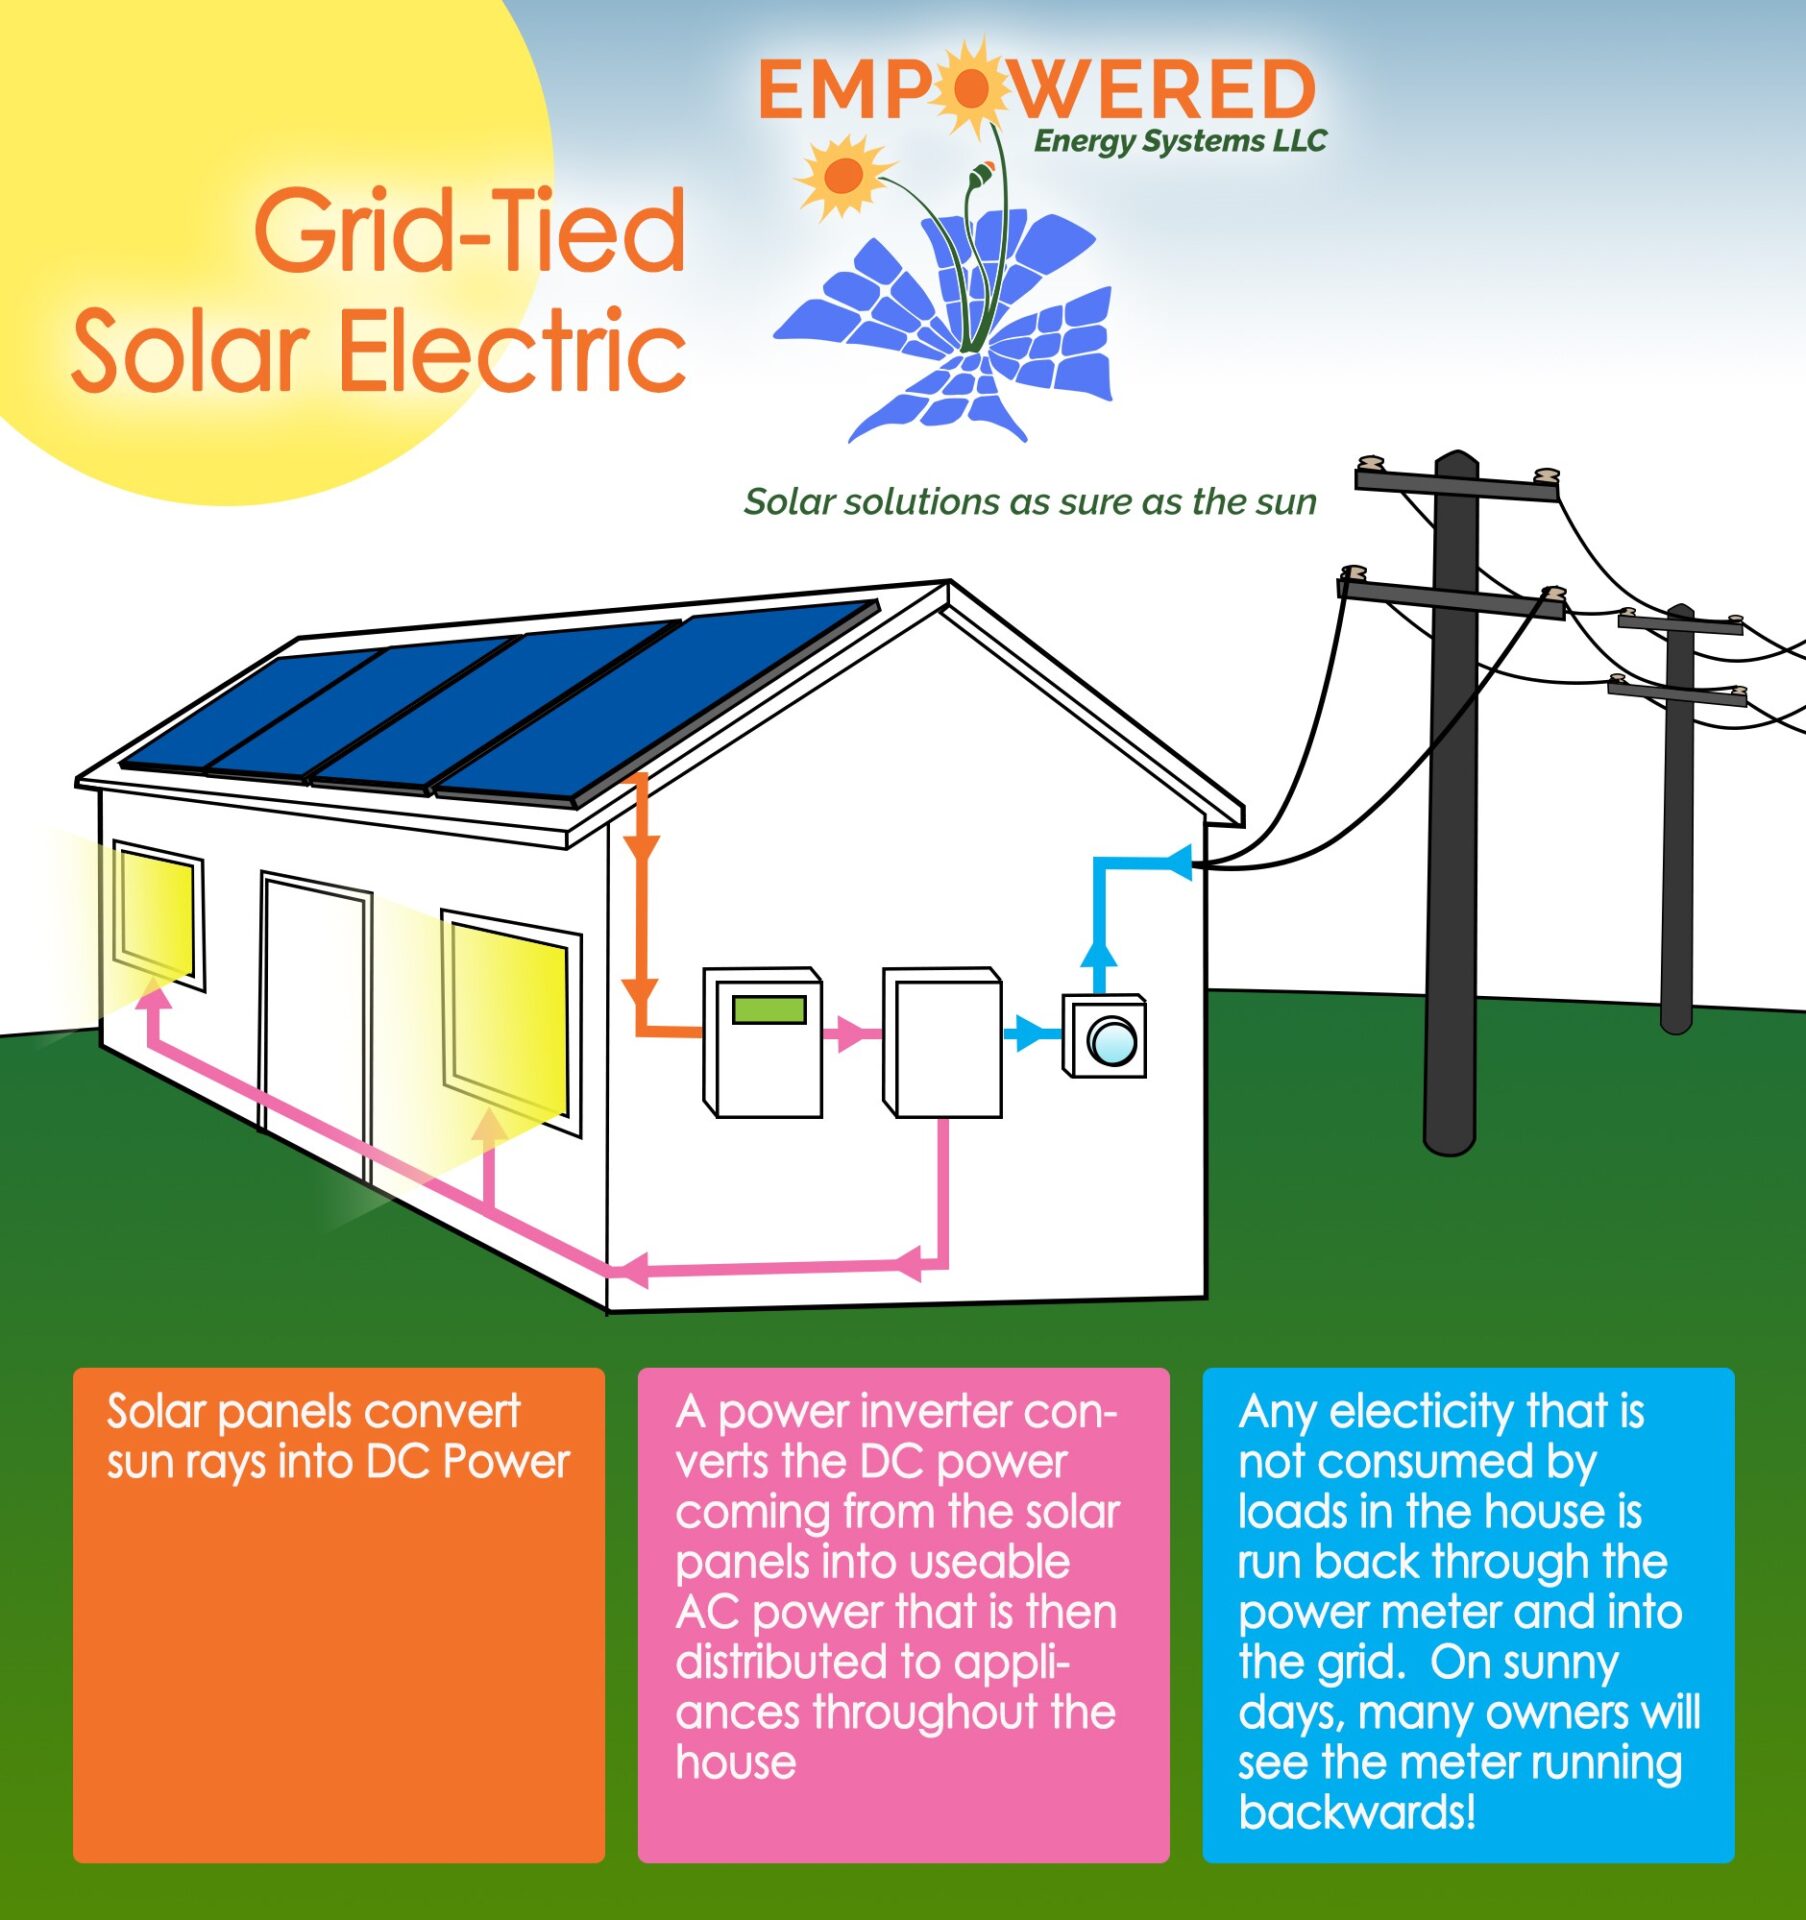 residential-solar-empowered-energy-systems